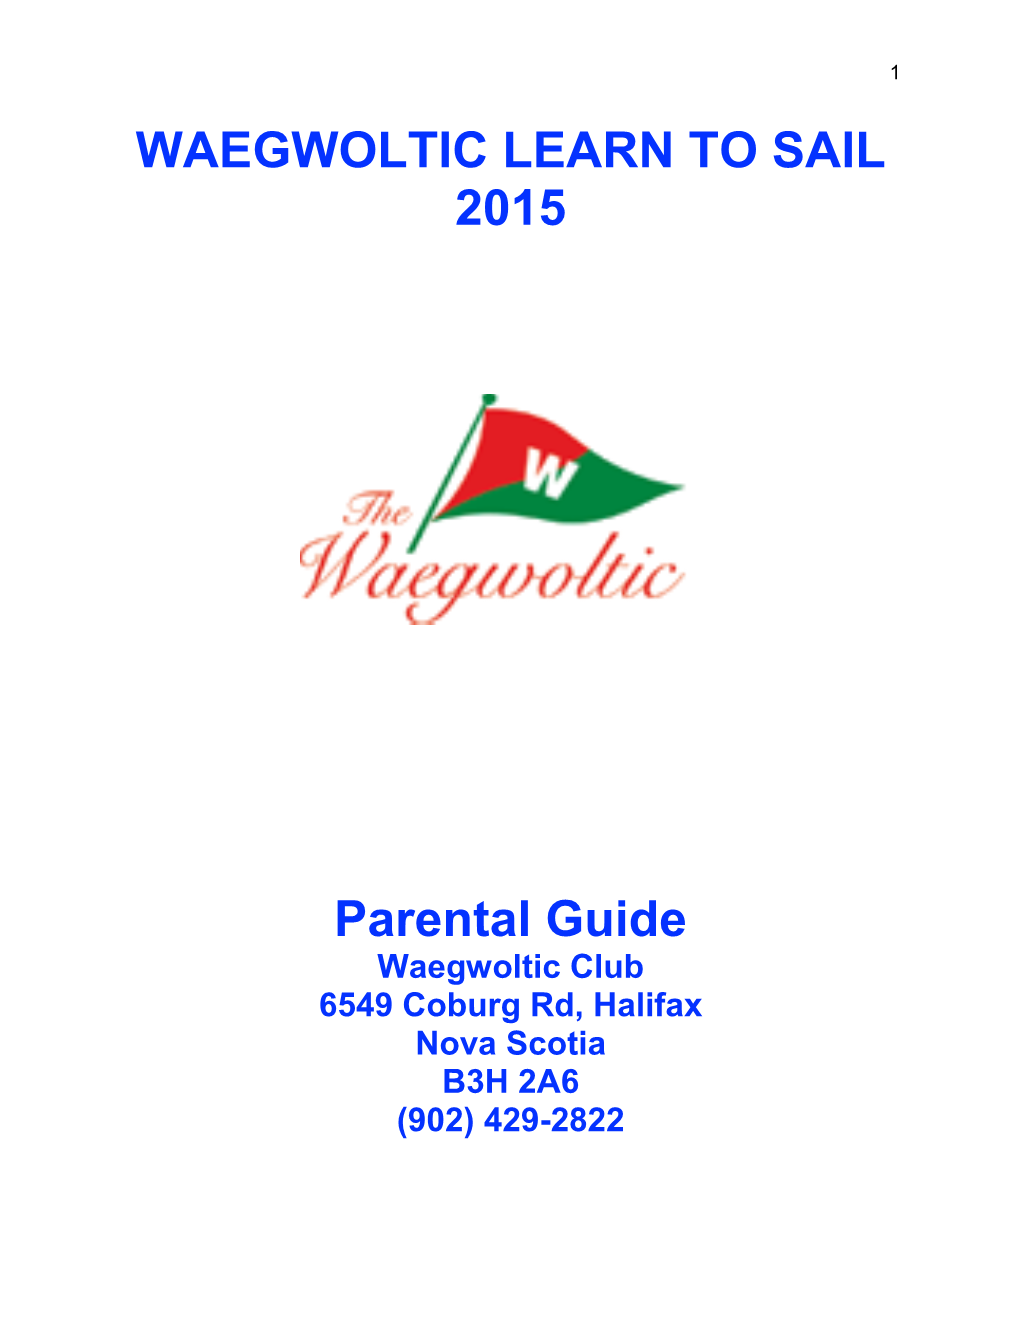 WAEGWOLTIC LEARN to SAIL 2015 Parental Guide